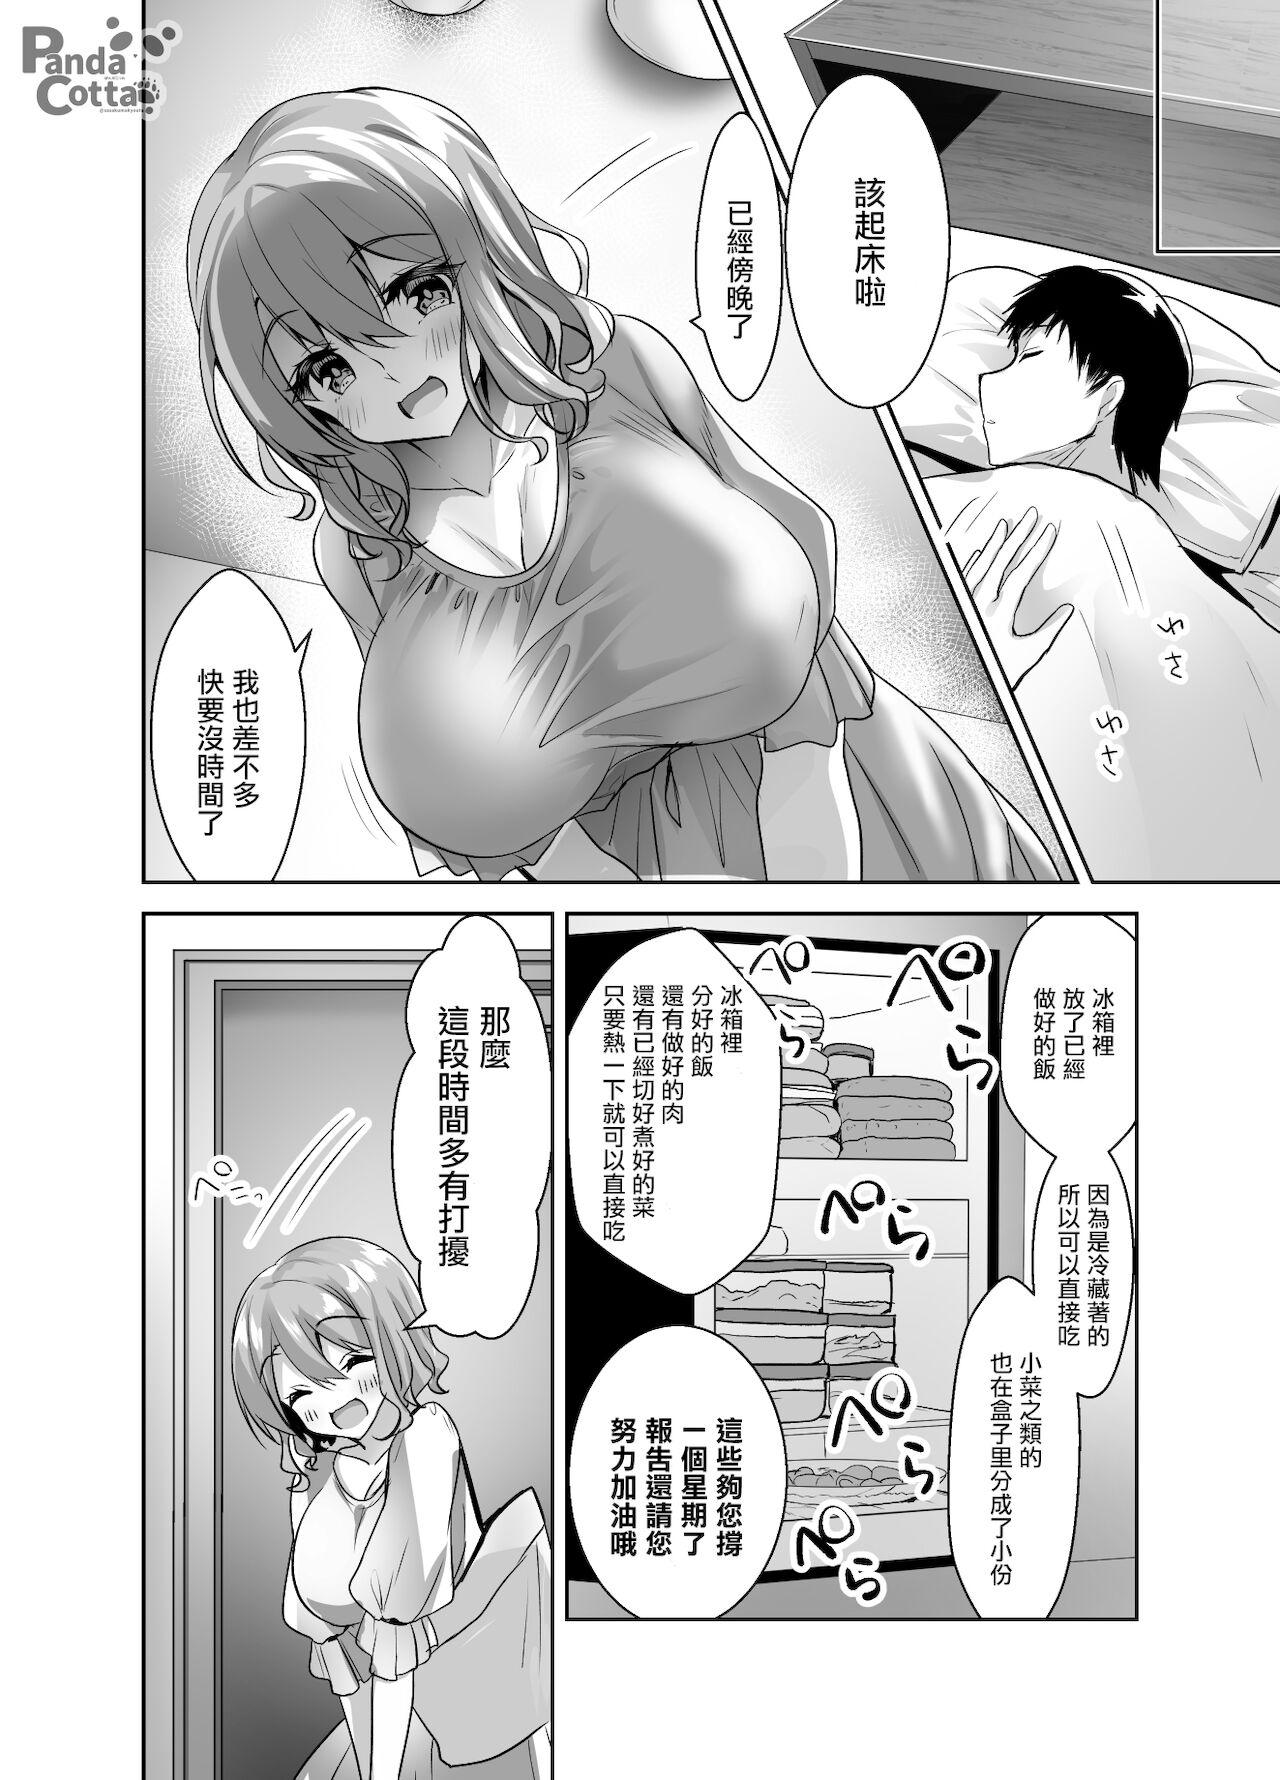 Oppai Maid Delivery 25